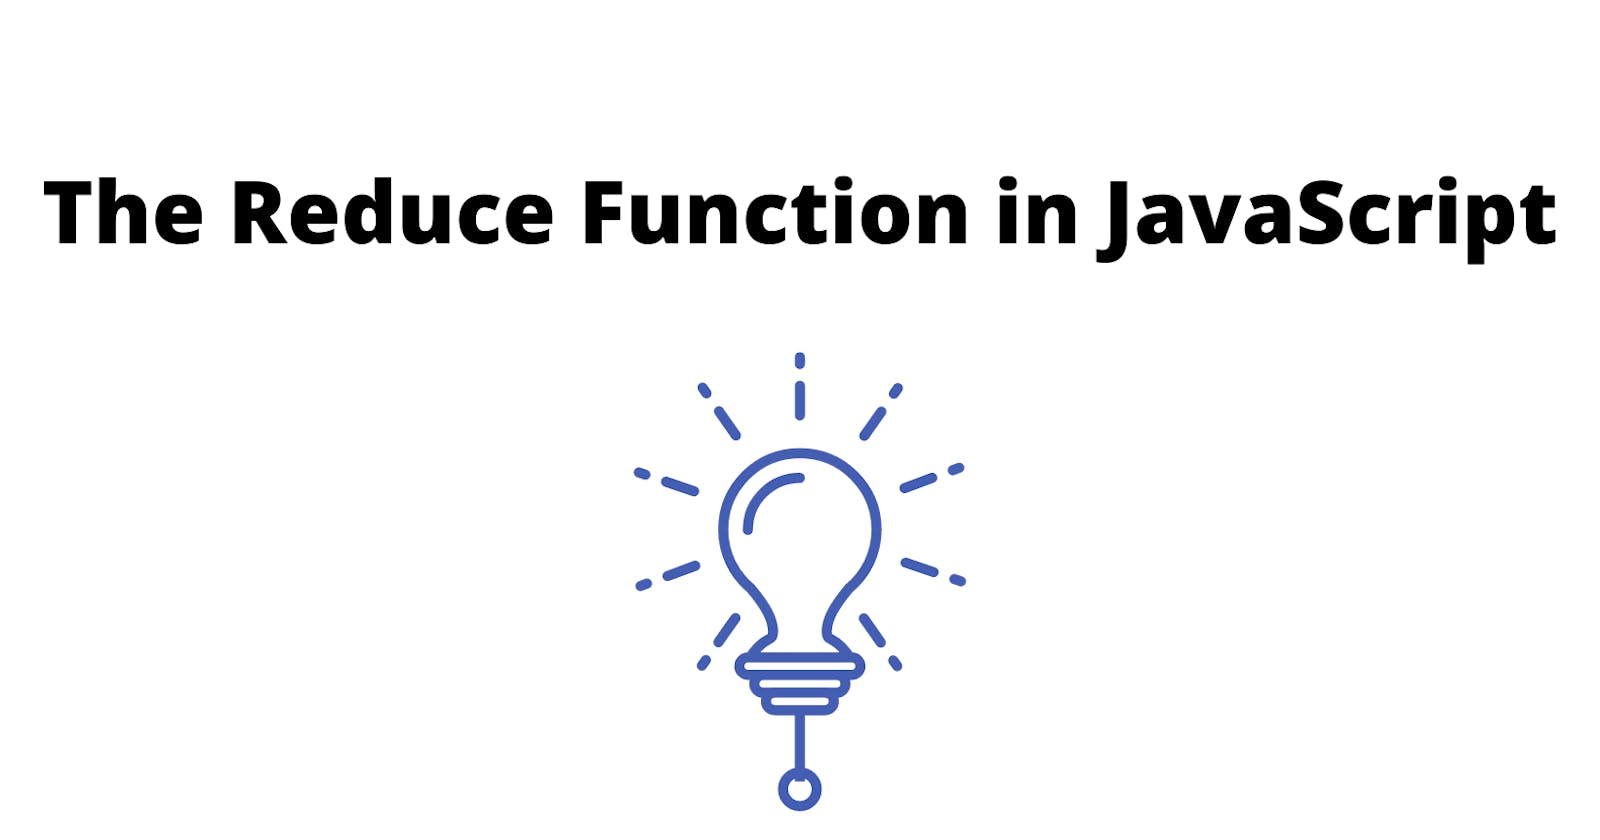 The reduce function in JavaScript